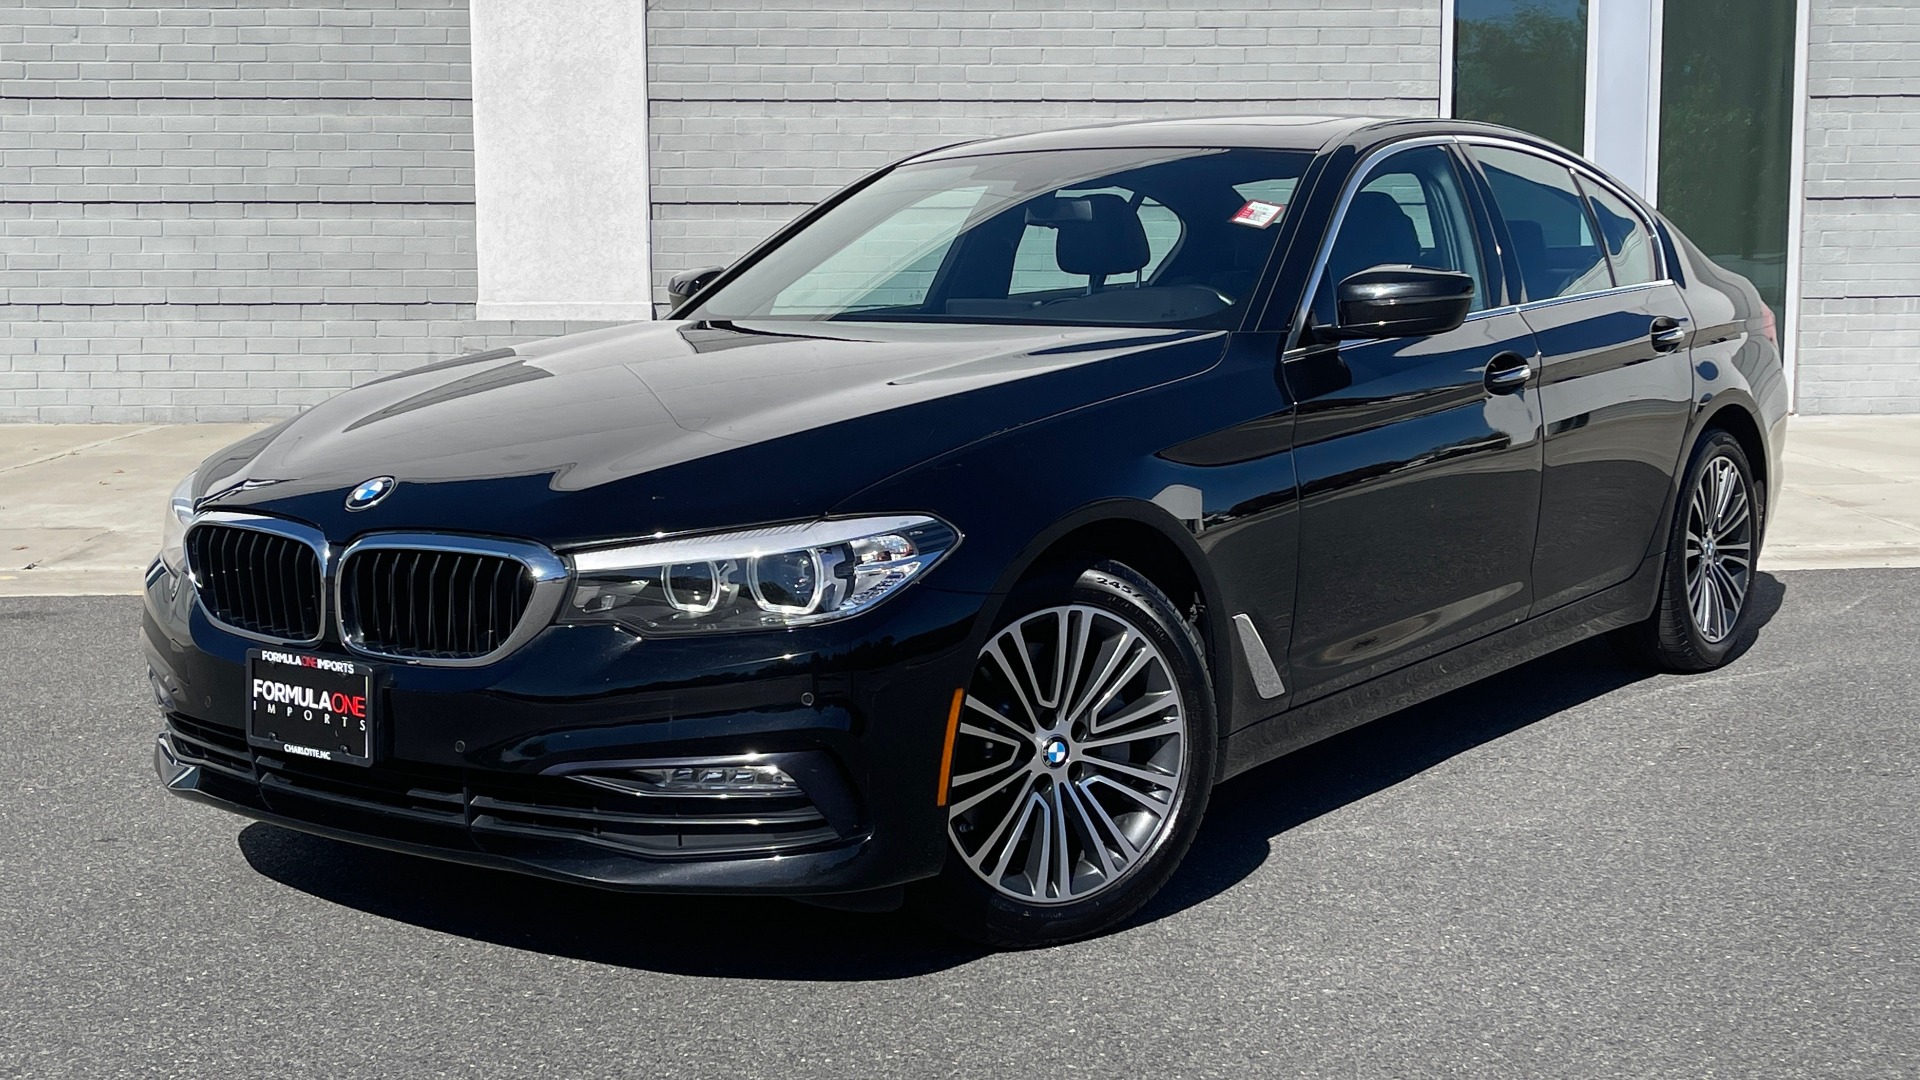 Used 2018 BMW 5 SERIES 530I XDRIVE 2.0L / 8-SPD AUTO / NAV / SUNROOF / REARVIEW for sale Sold at Formula Imports in Charlotte NC 28227 1